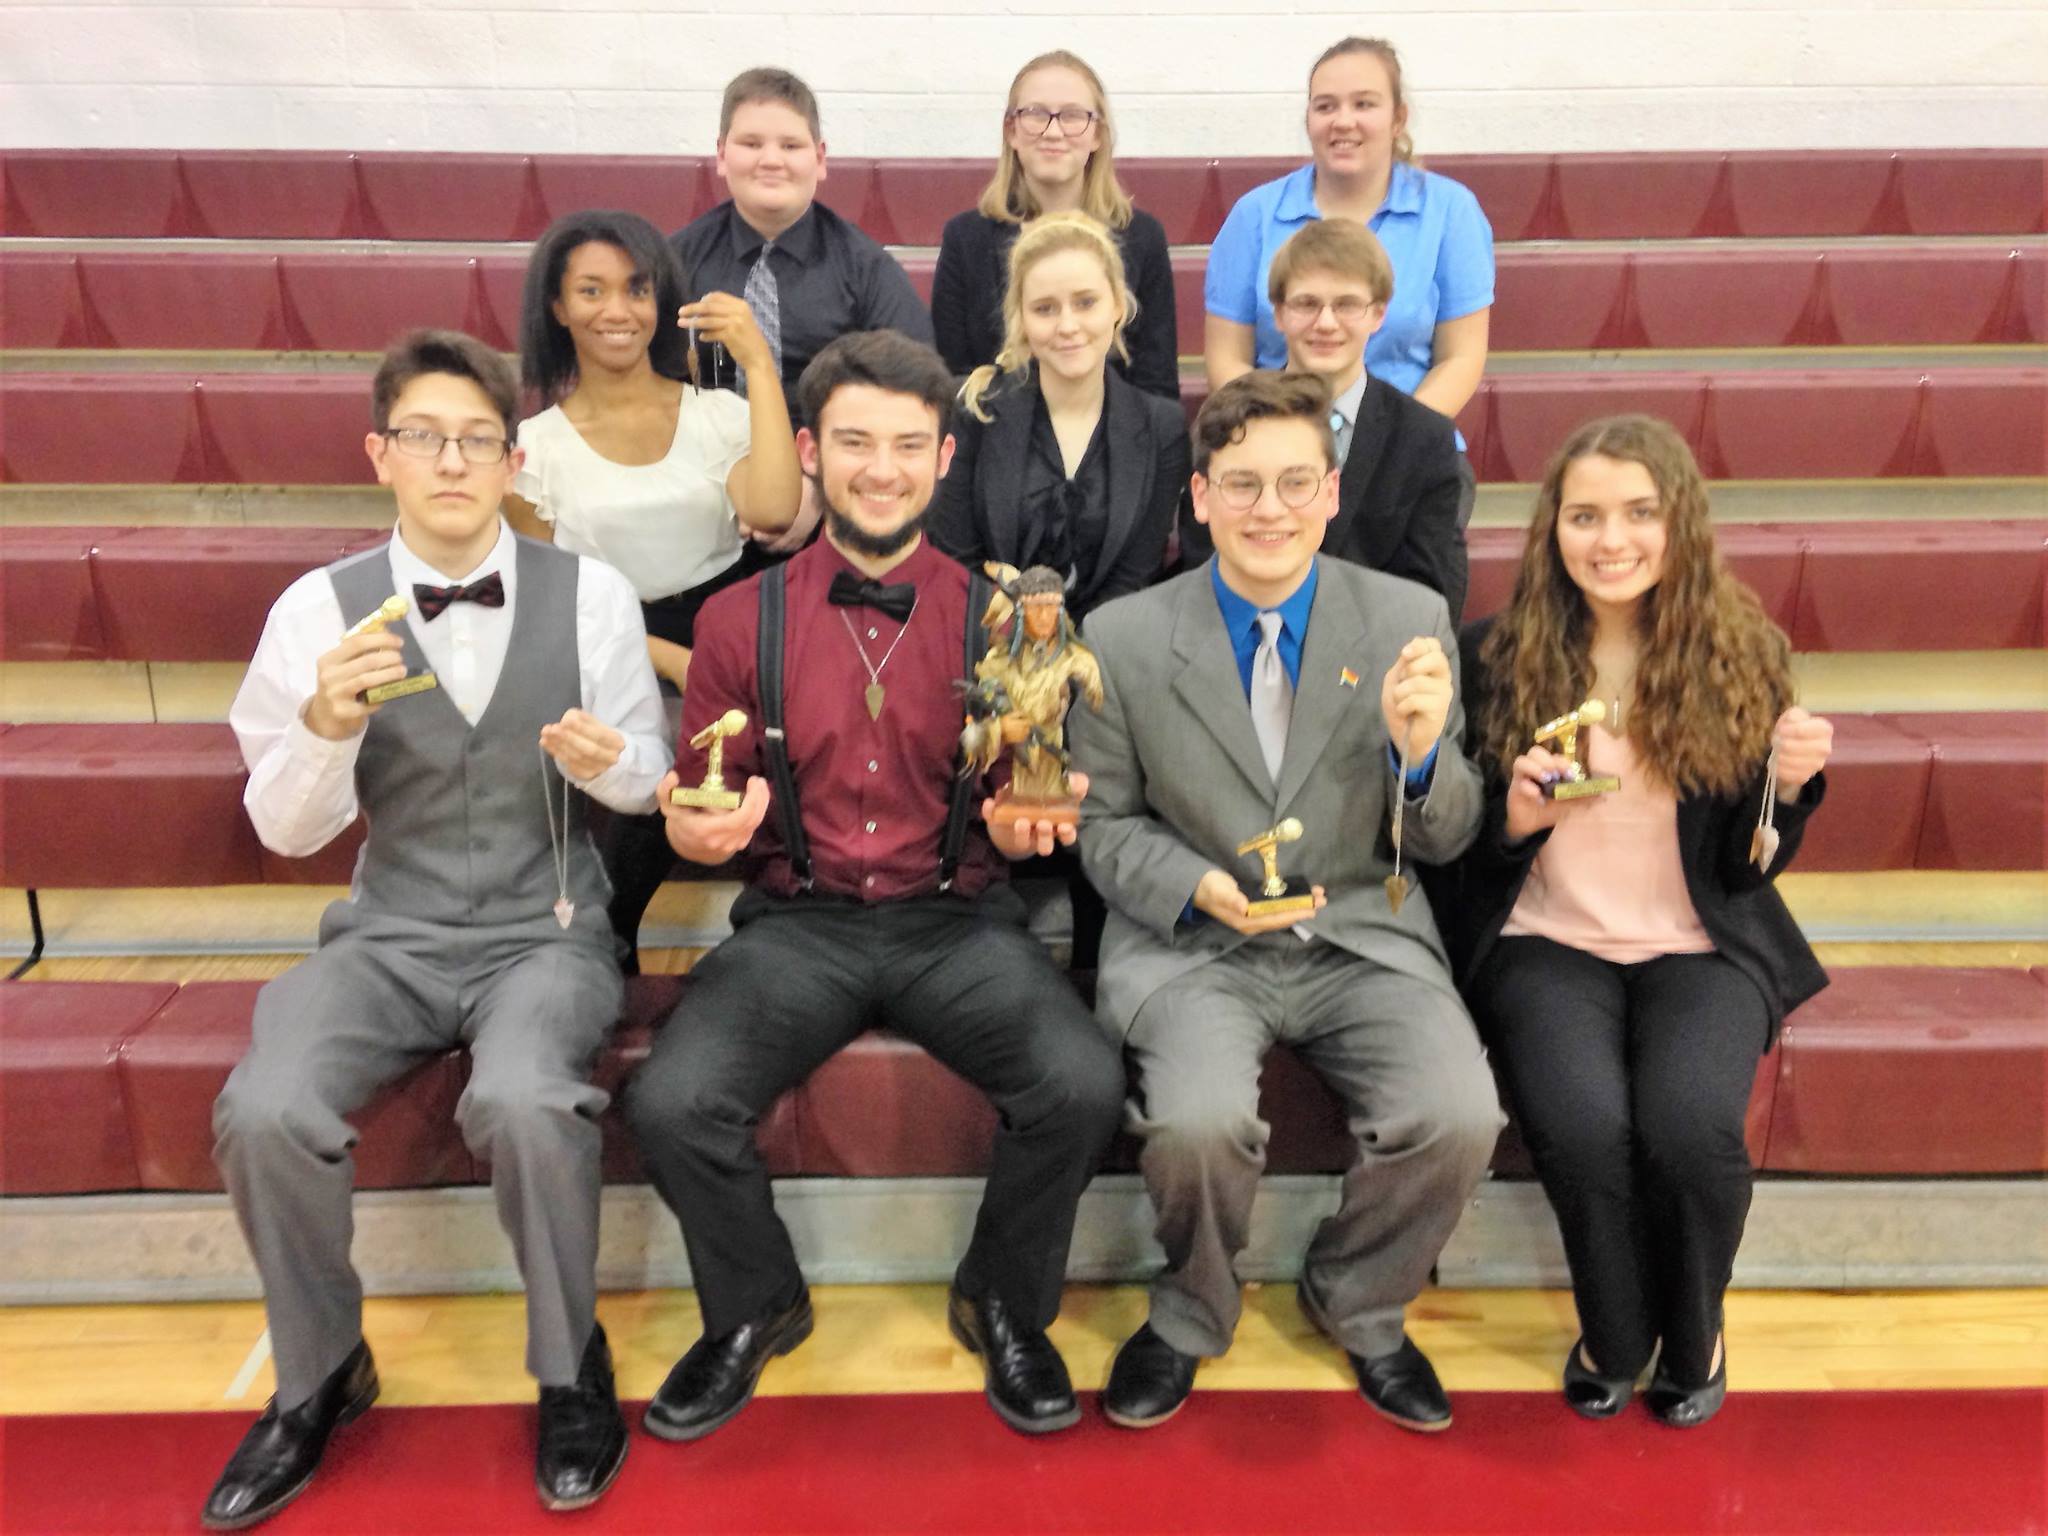 Le-Win/Orangeville Speech Team after team 1st place ranking at the Stockton Speech Tournament on Dec. 2nd.